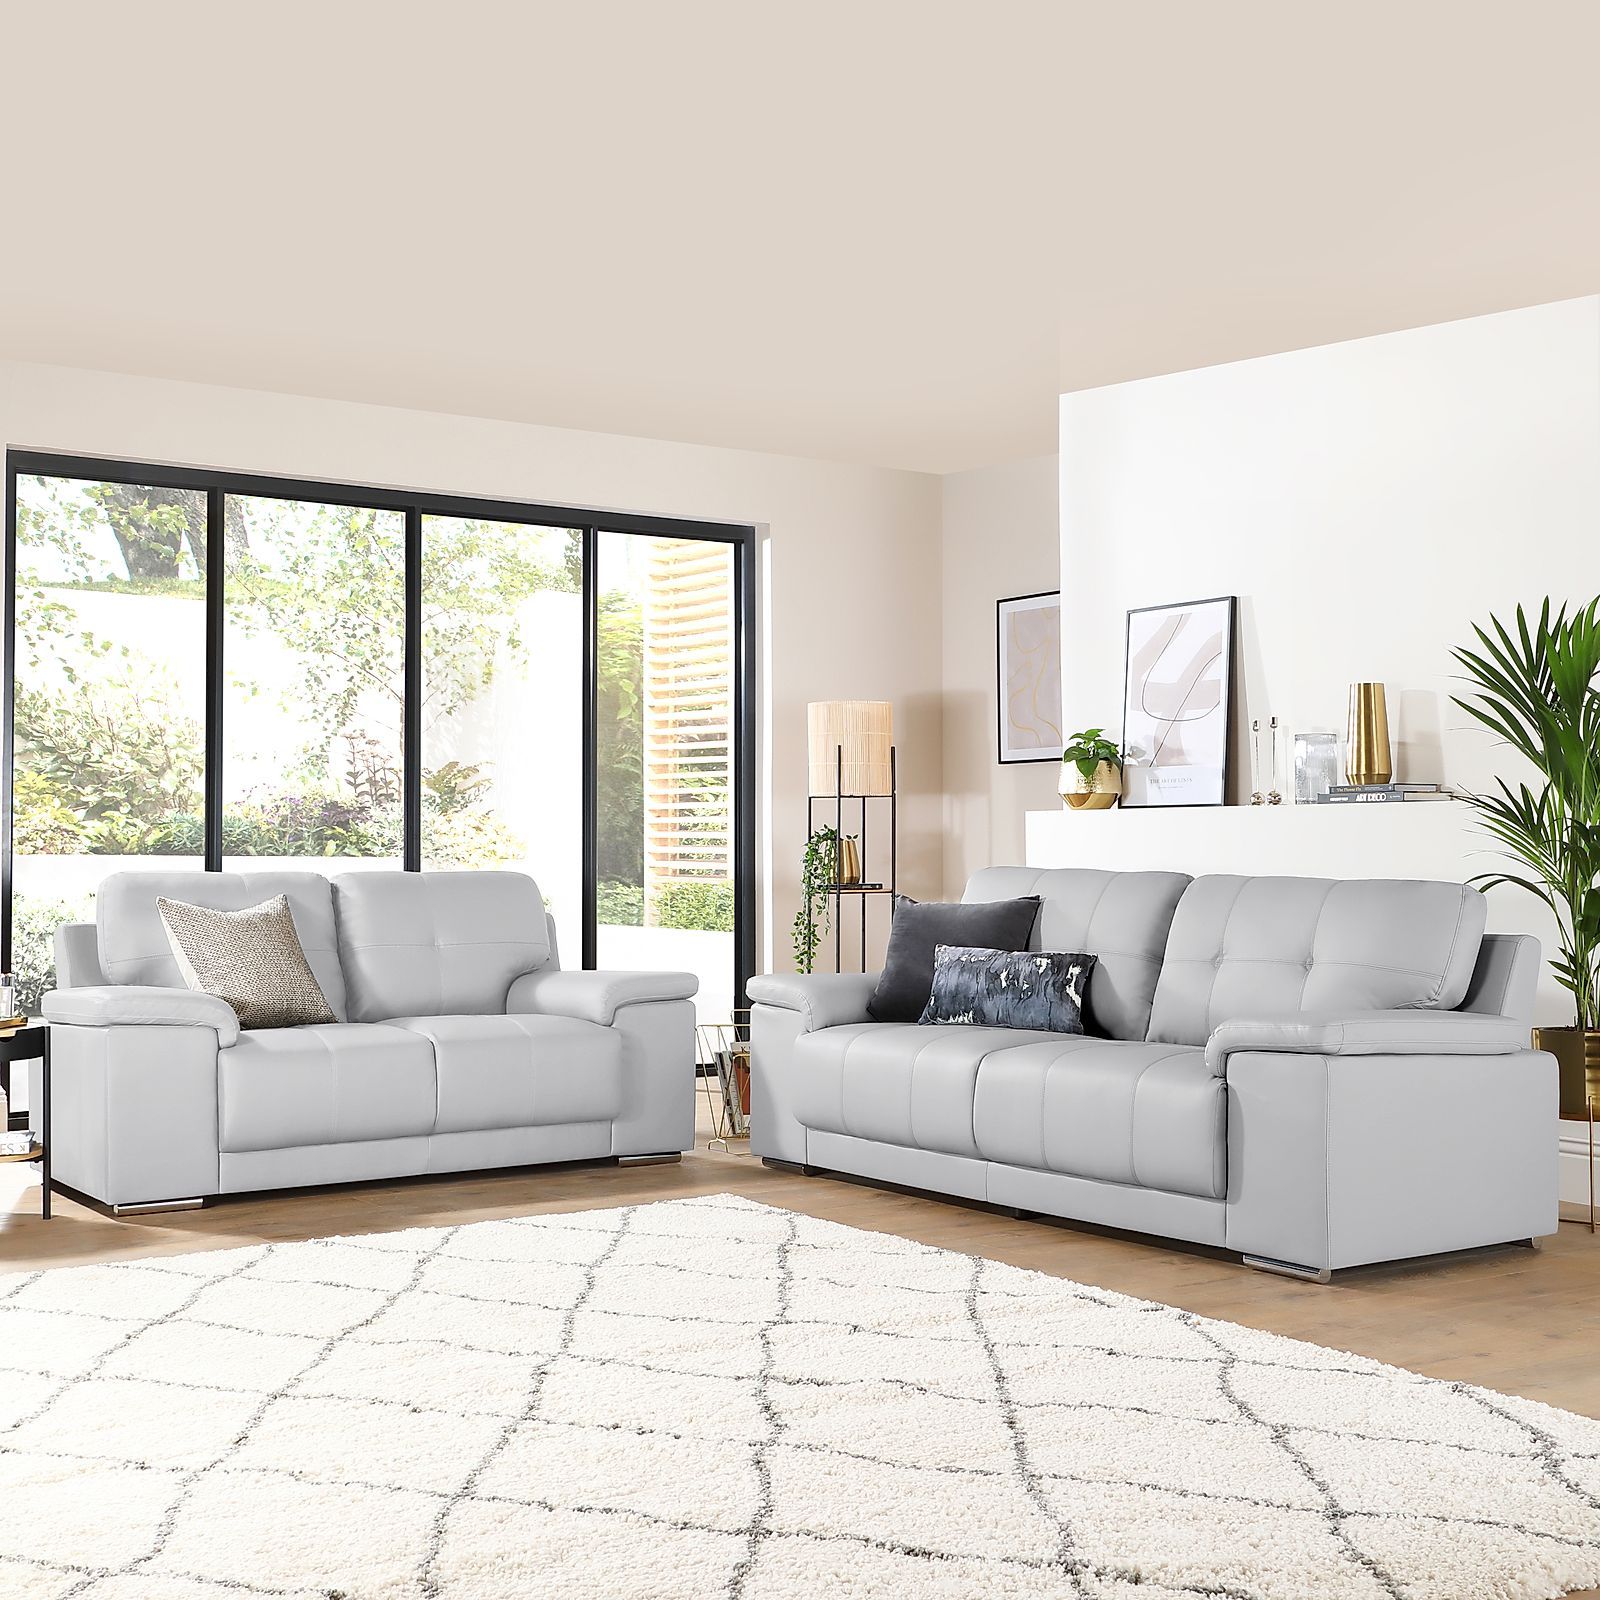 Kansas Light Grey Leather 3+2 Seater Sofa Set | Furniture Choice With Regard To Sofas In Light Gray (Gallery 17 of 22)